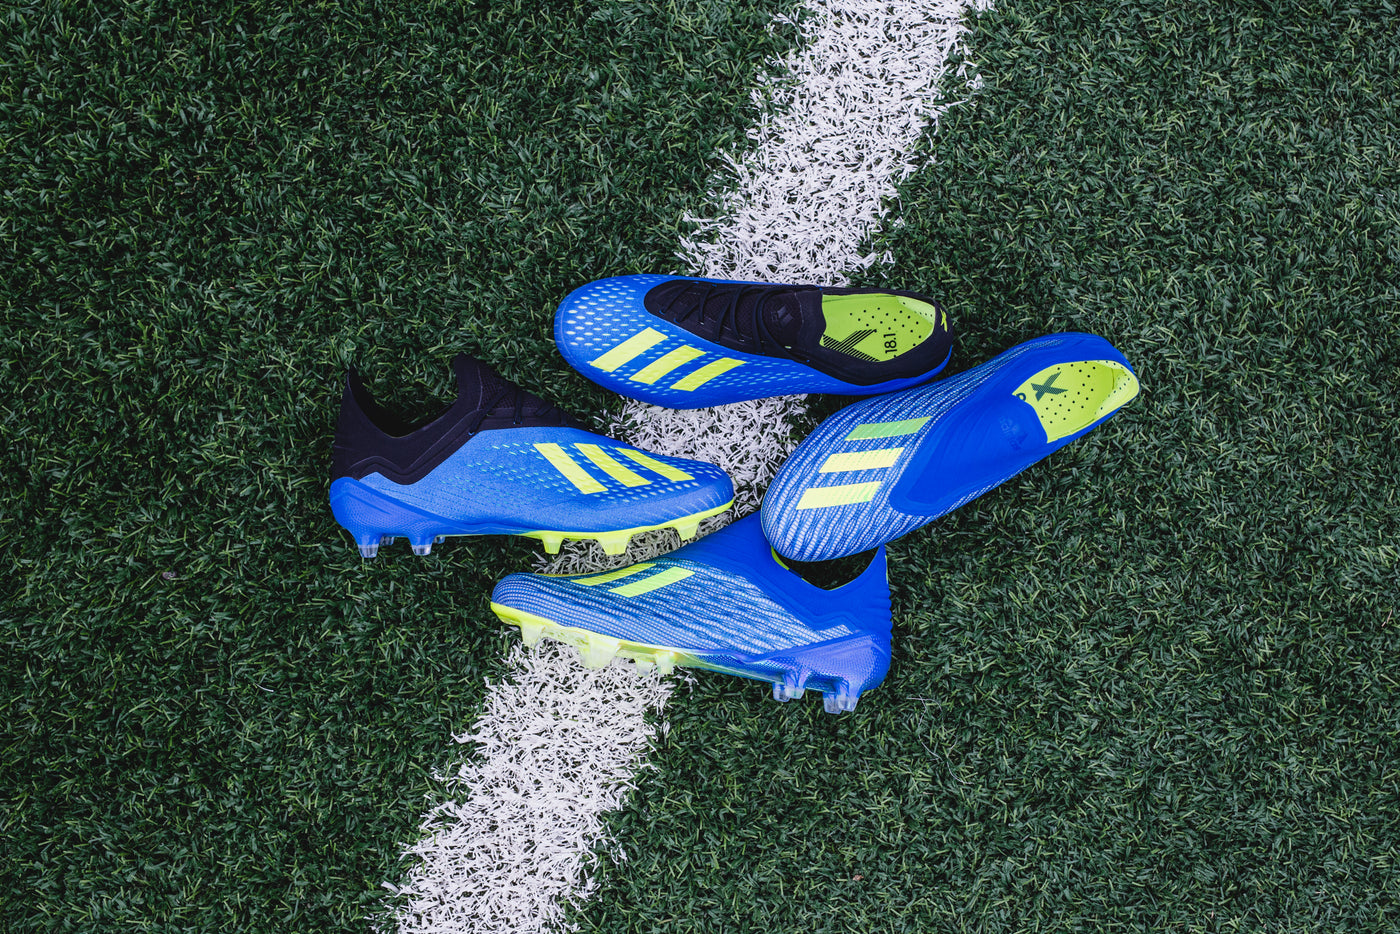 adidas X18+ and X18.1 'Energy Mode' - the F50 is back